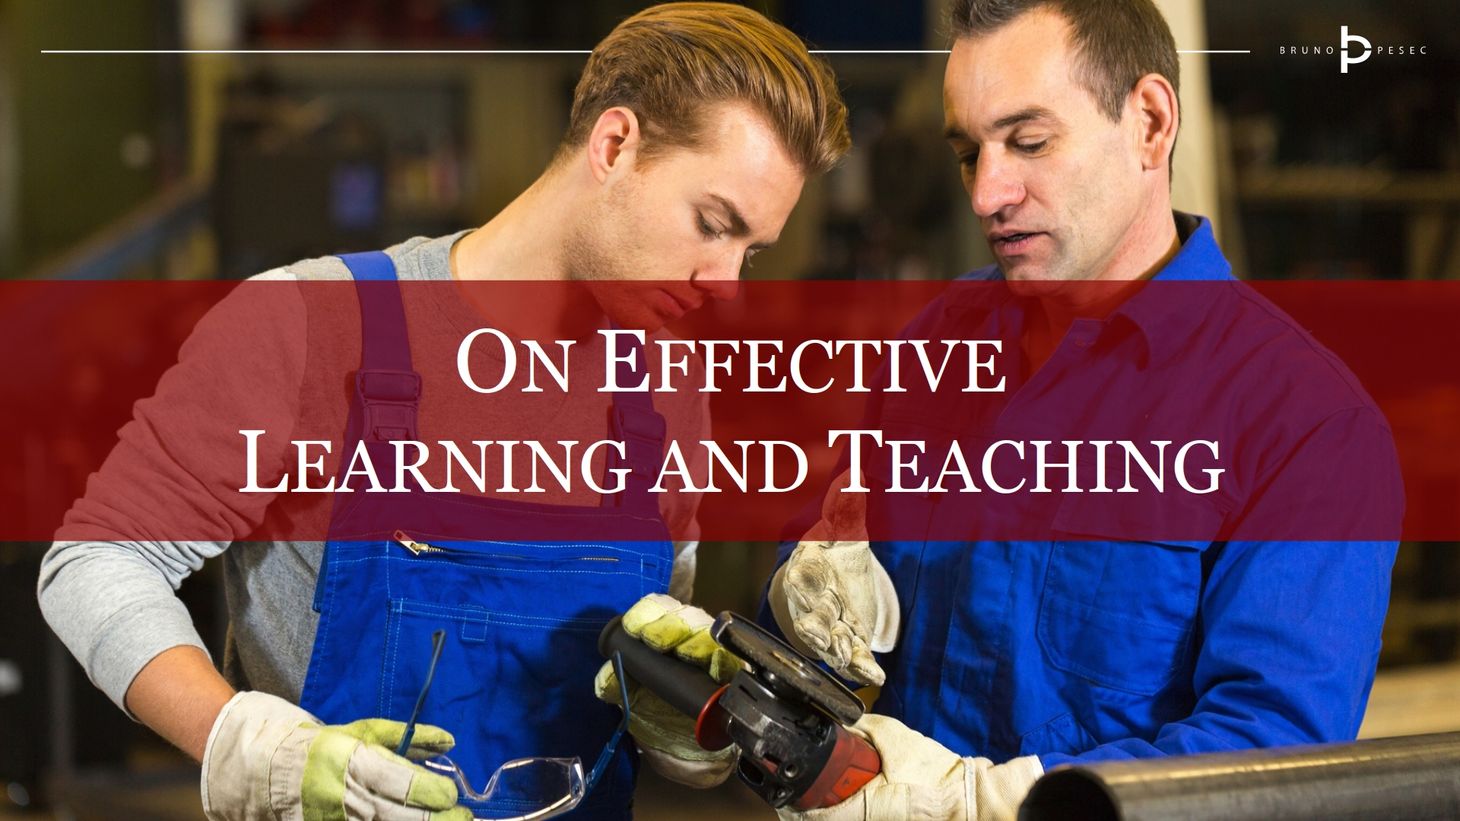 On effective learning and teaching